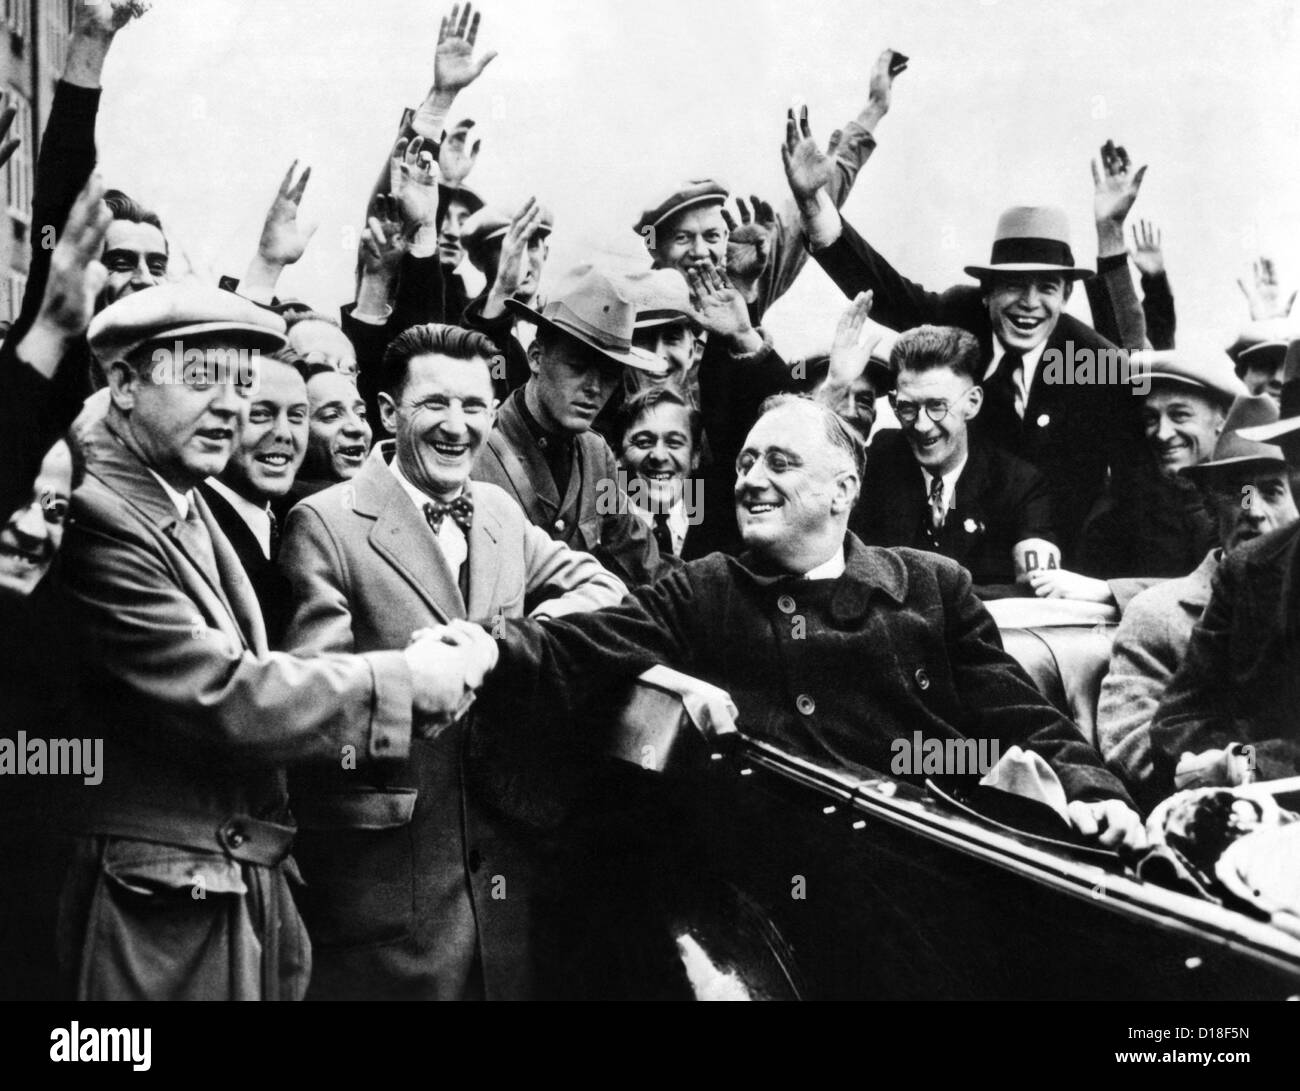 Franklin Roosevelt in the back seat of his car, surrounded by cheering citizens. 1930s. (CSU ALPHA 33) CSU Archives/Everett Stock Photo